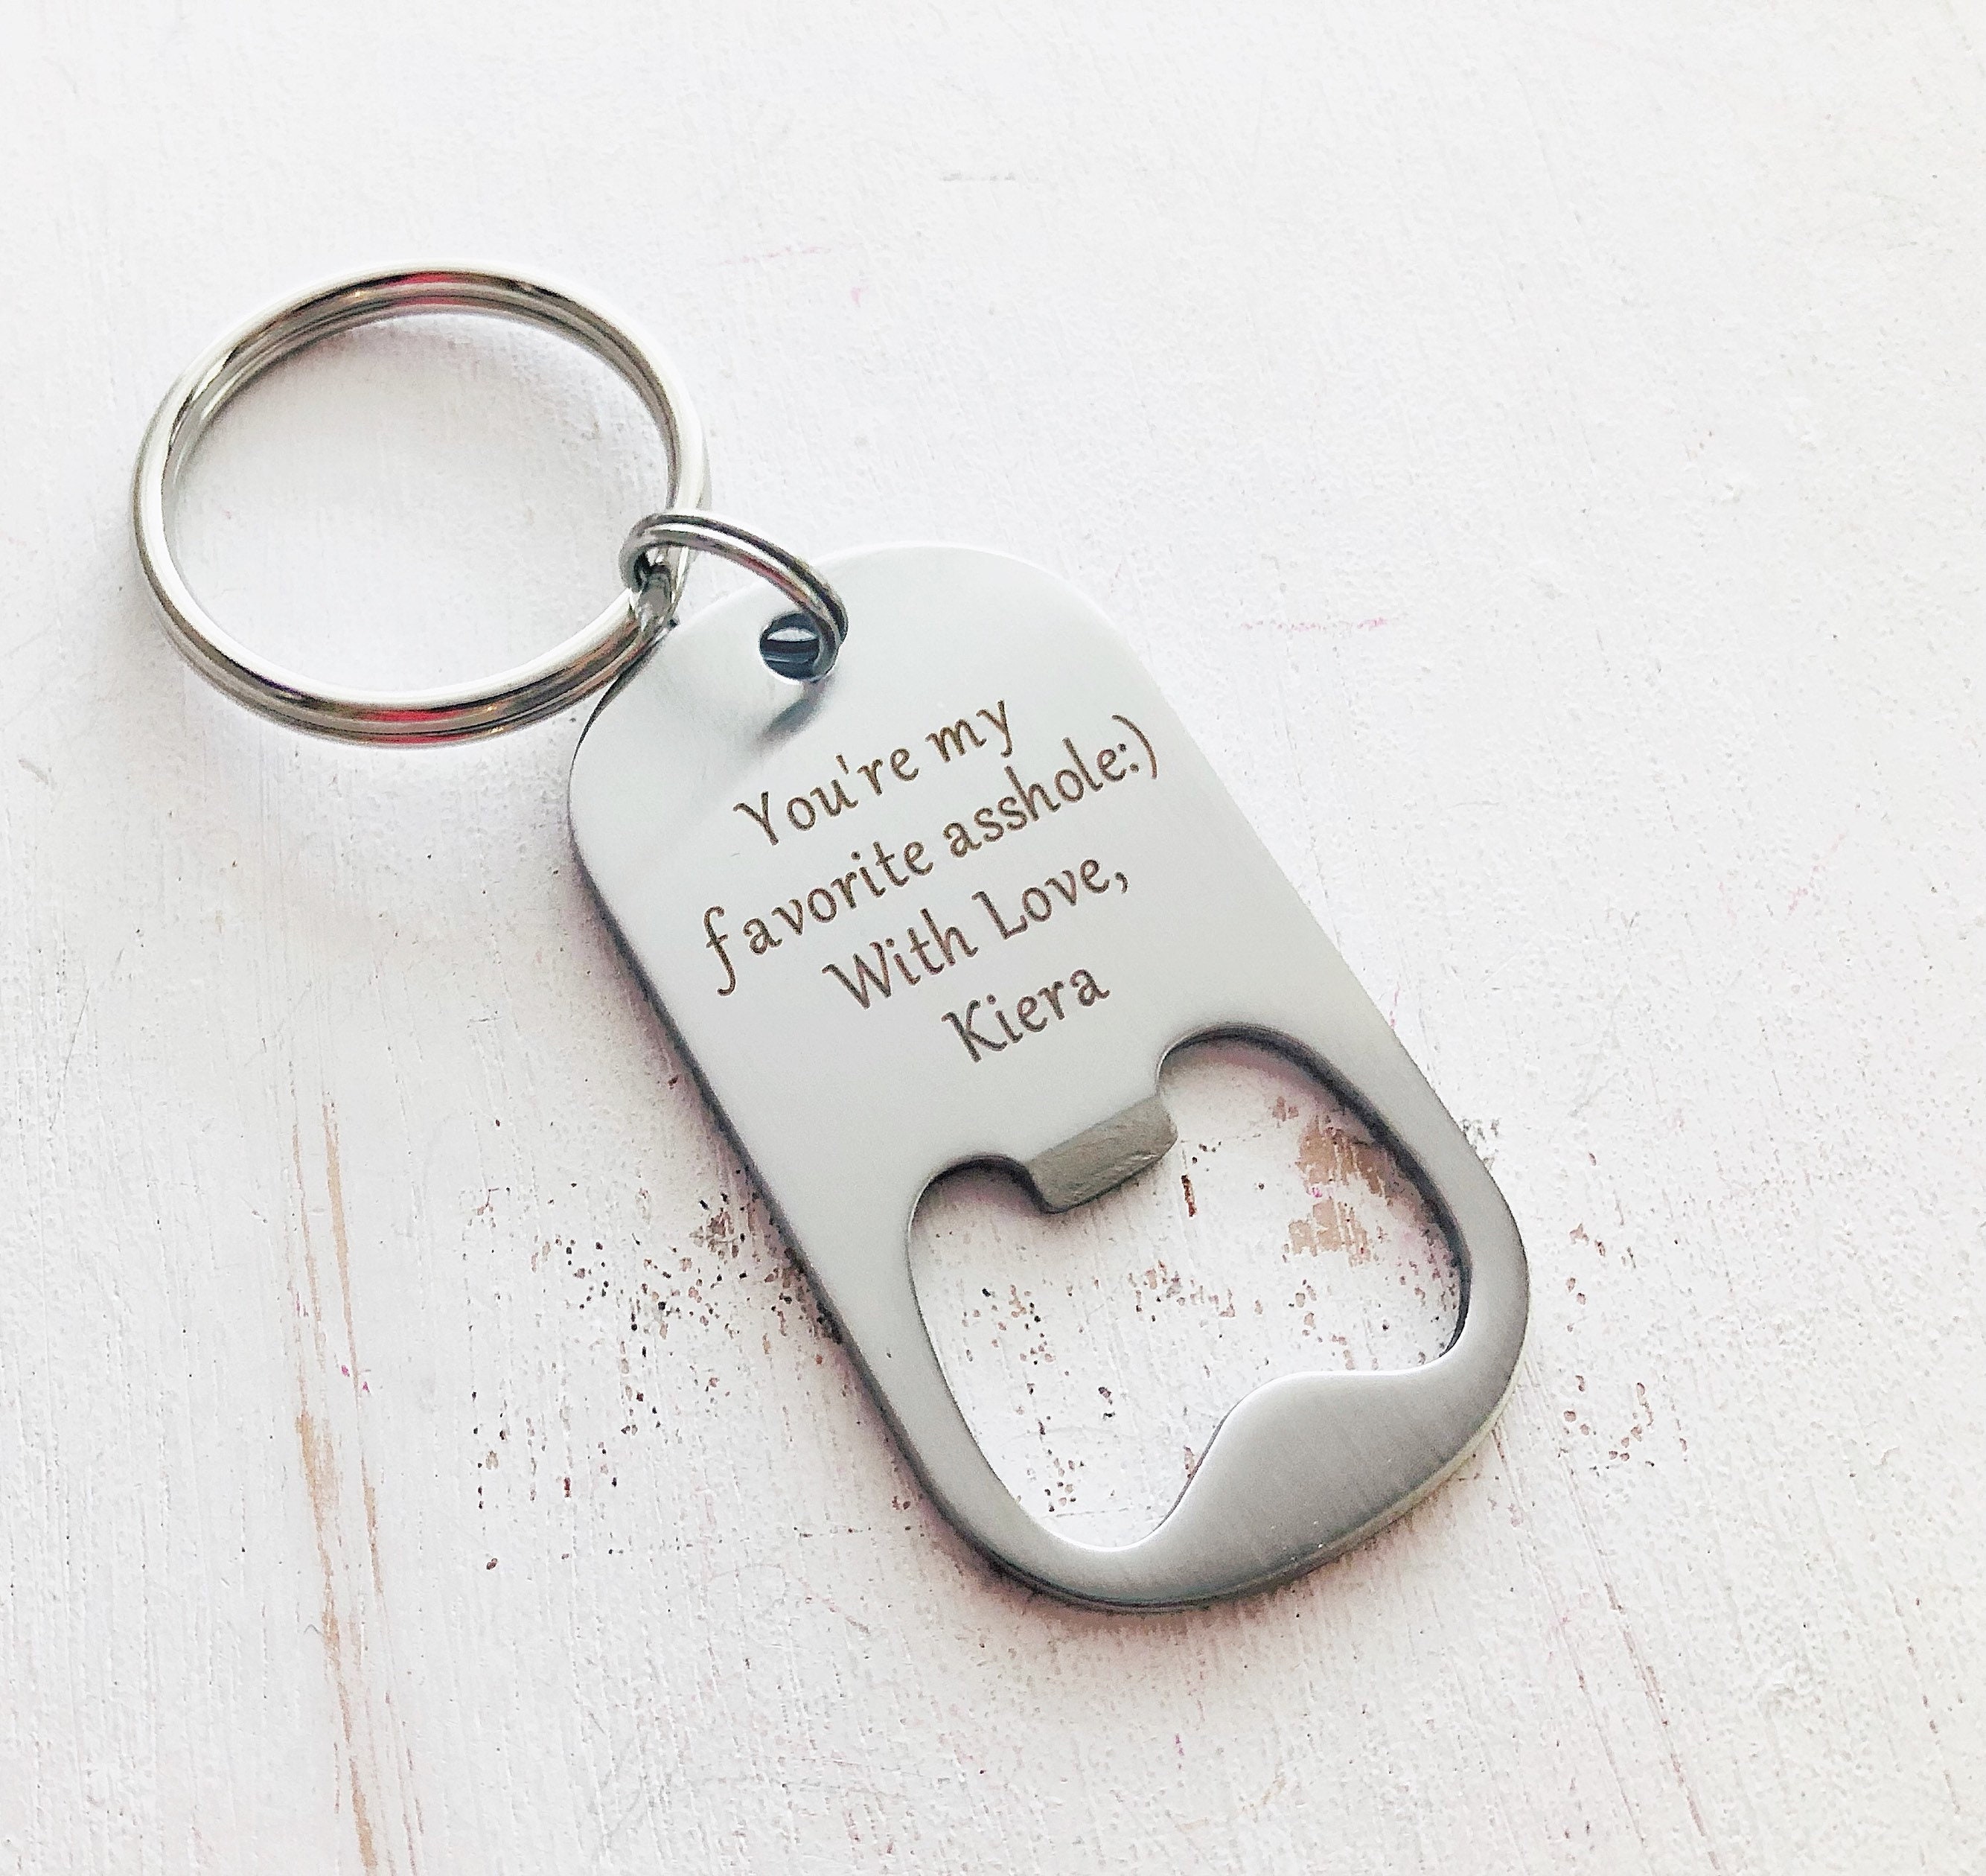 Funny Gift for Him Keychain Dog Tag You`re an Asshole but I Love You Gift for Boyfriend Husband Birthday Valentines Day Thanksgiving Christams Gift